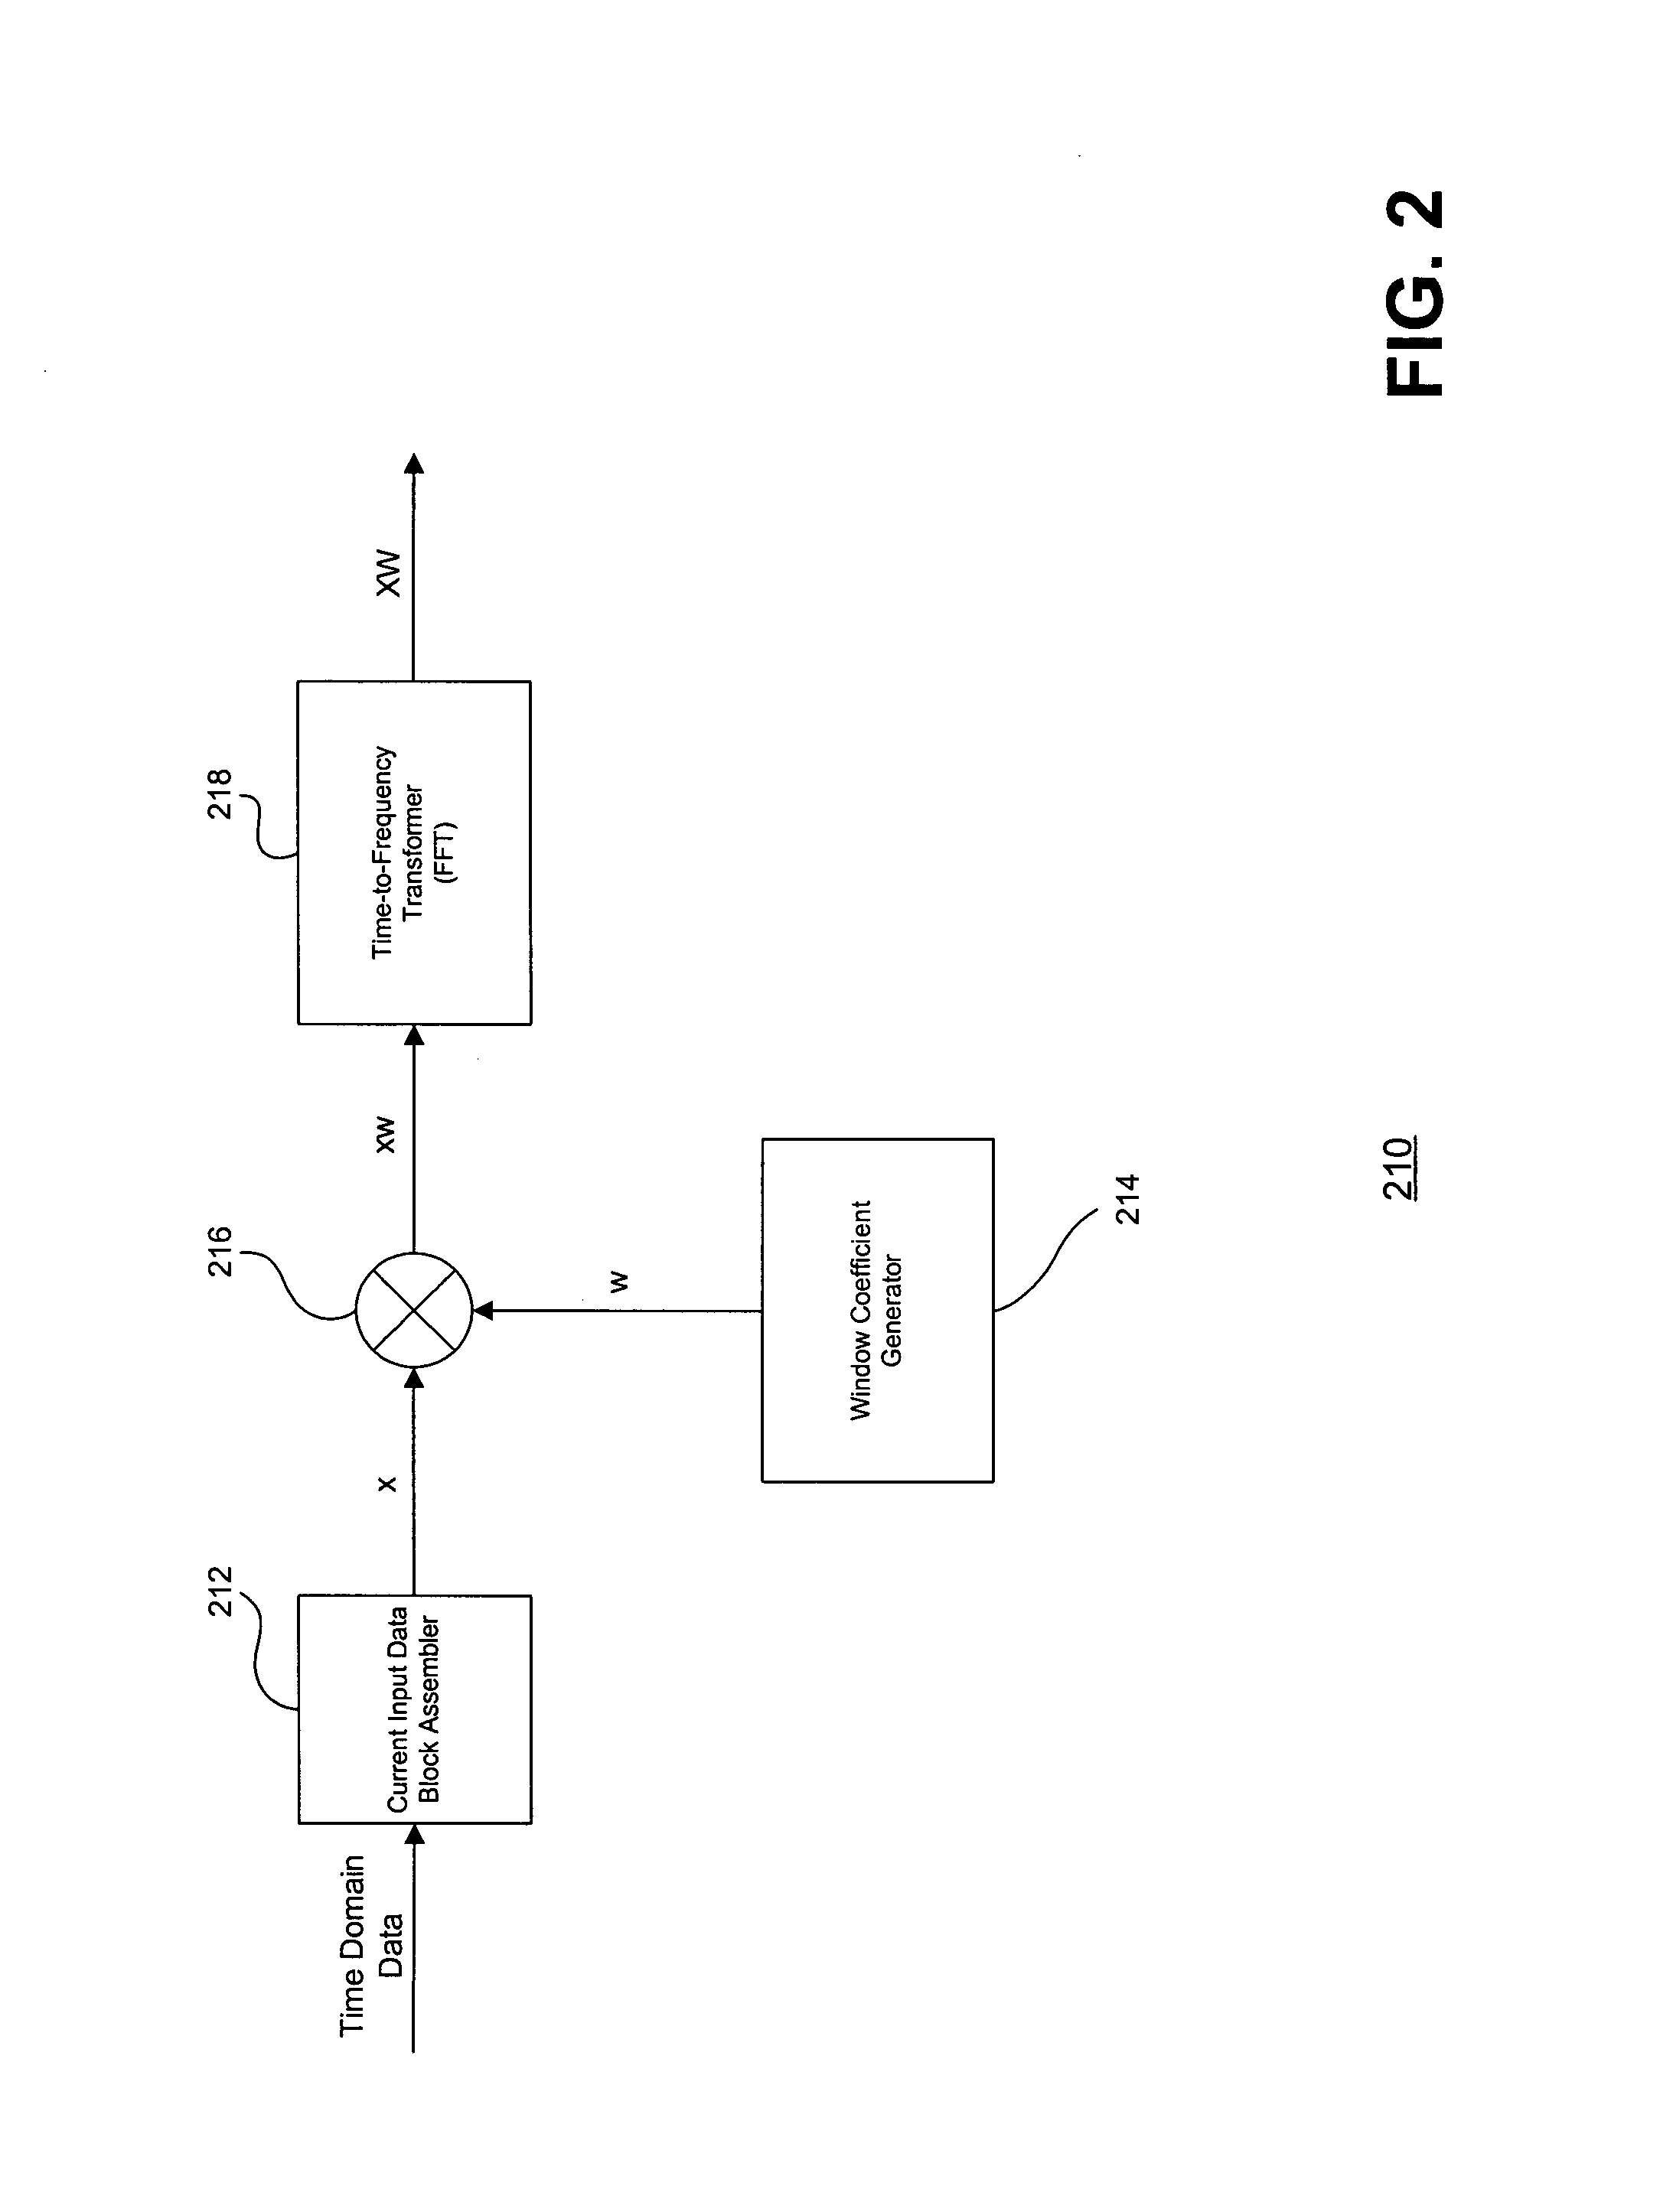 Narrowband interference excision device